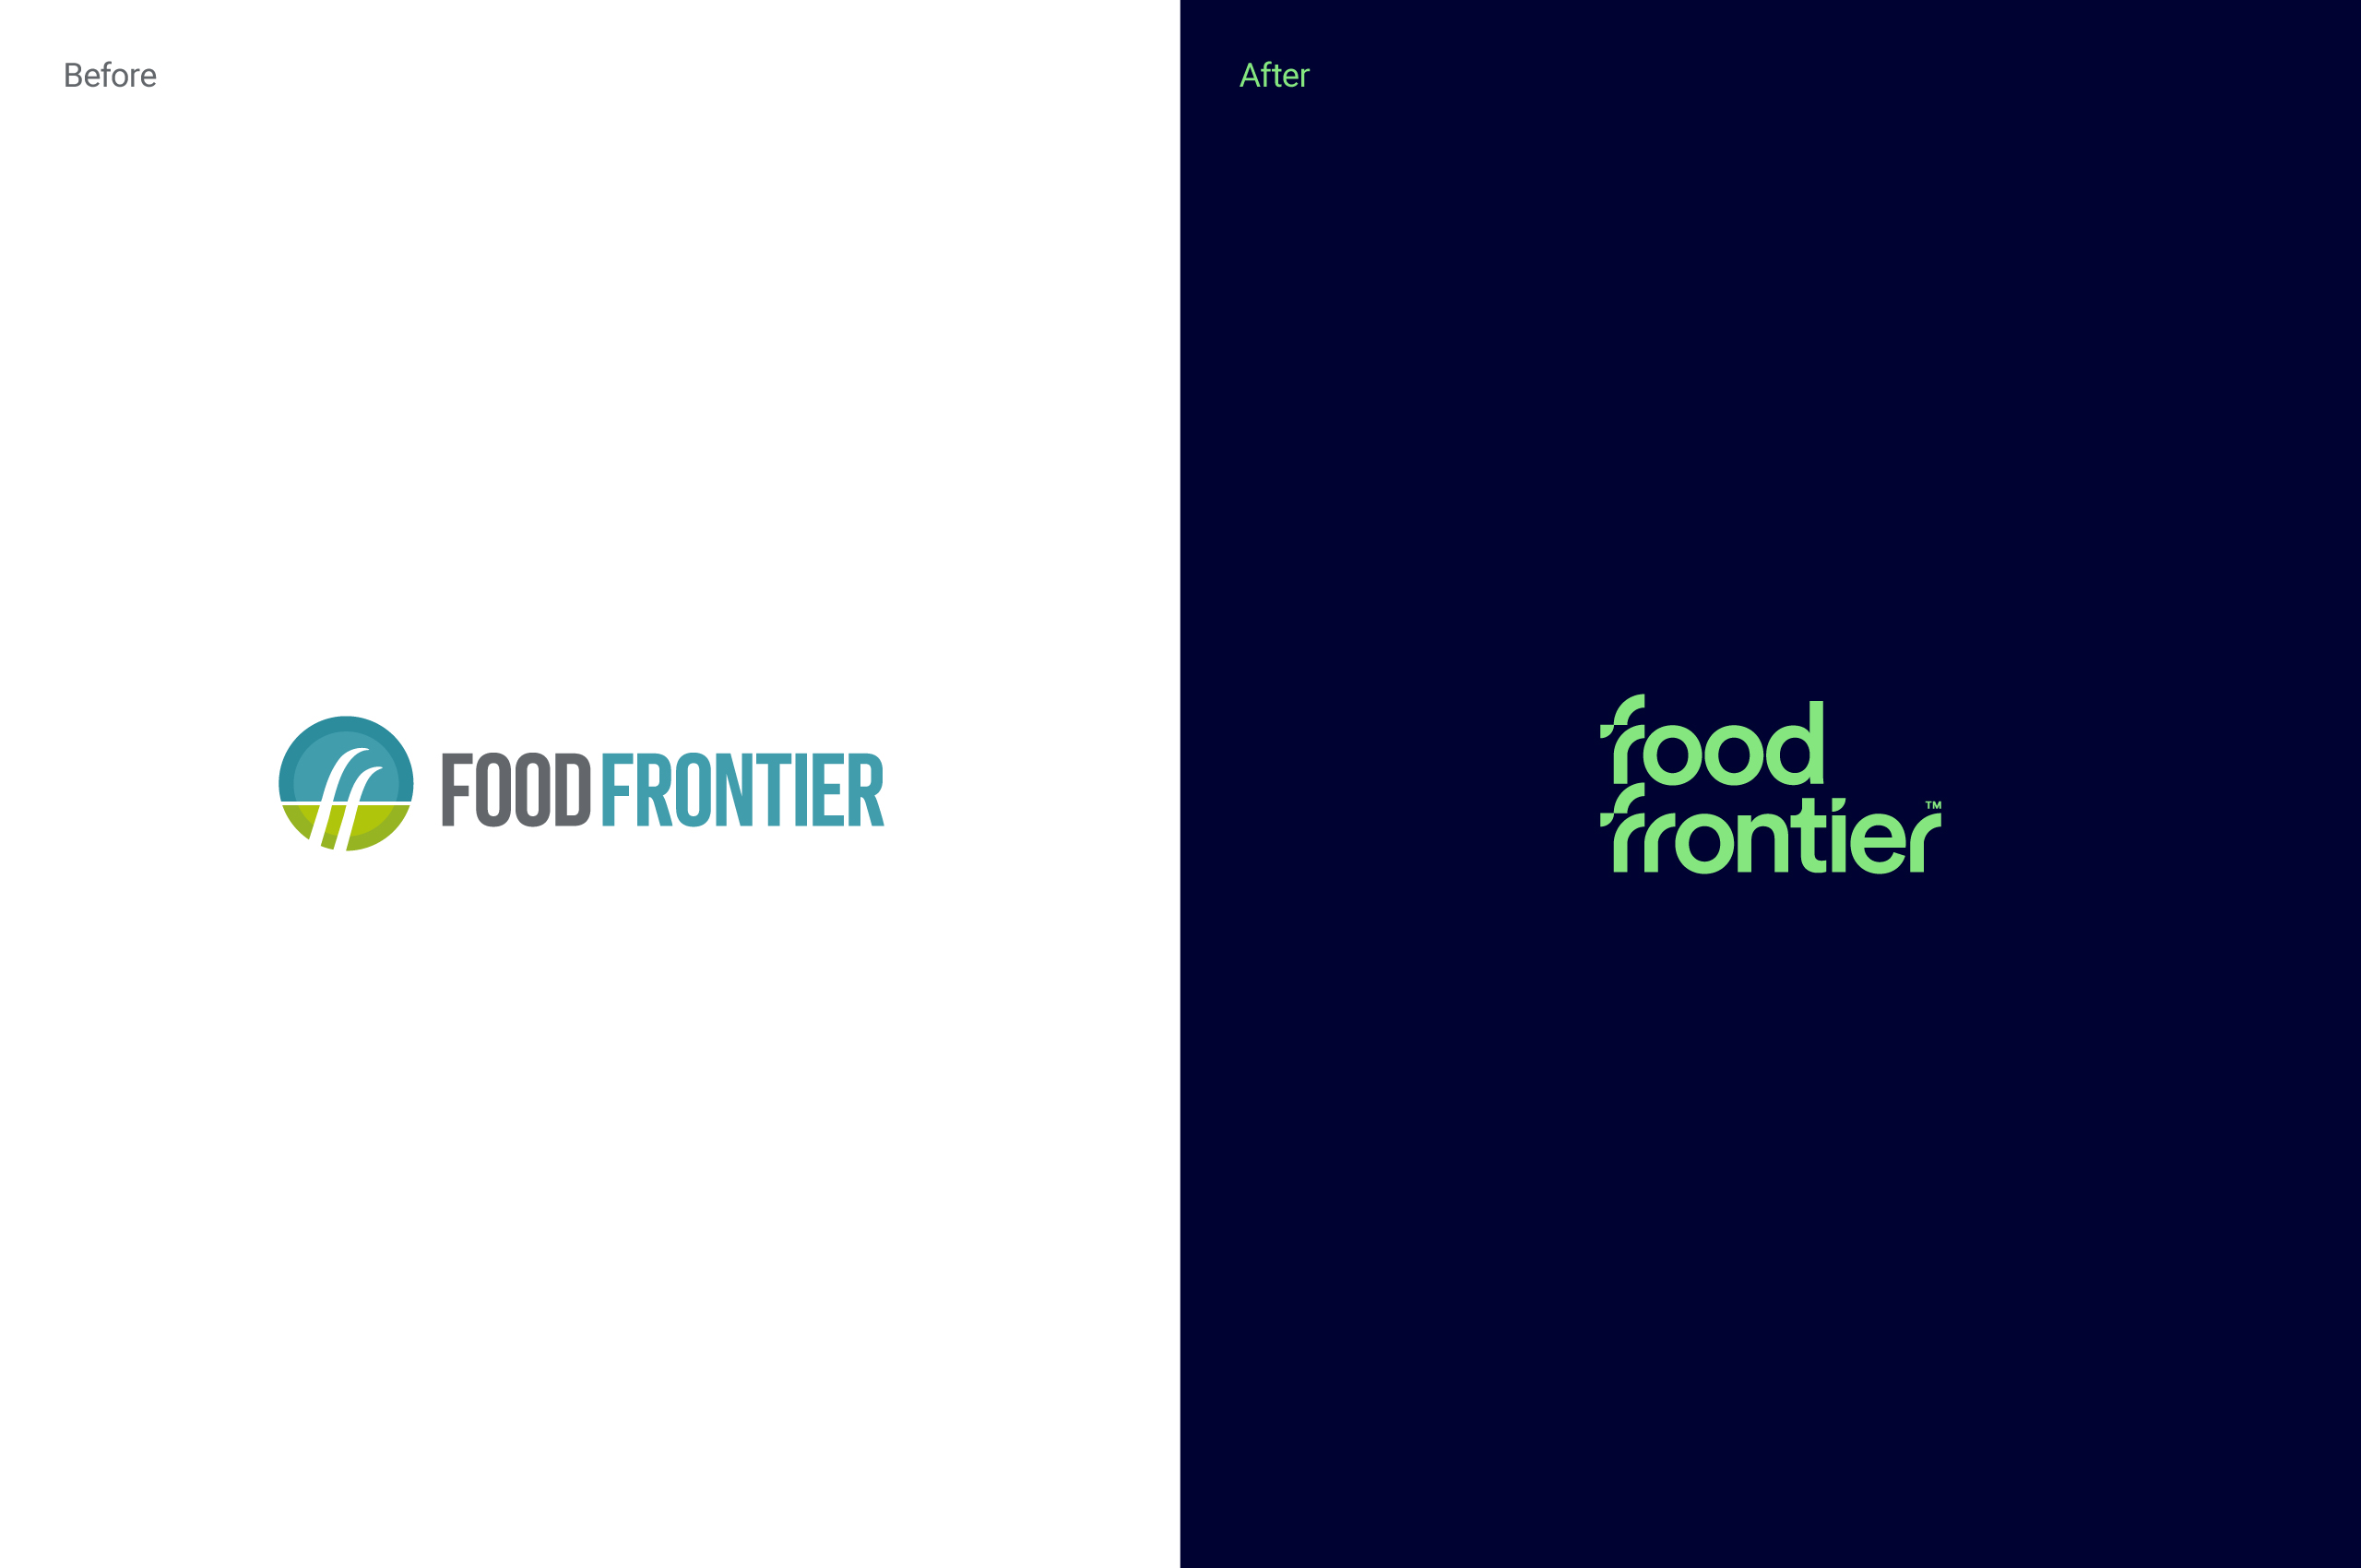 Food Frontier launches new brand and website